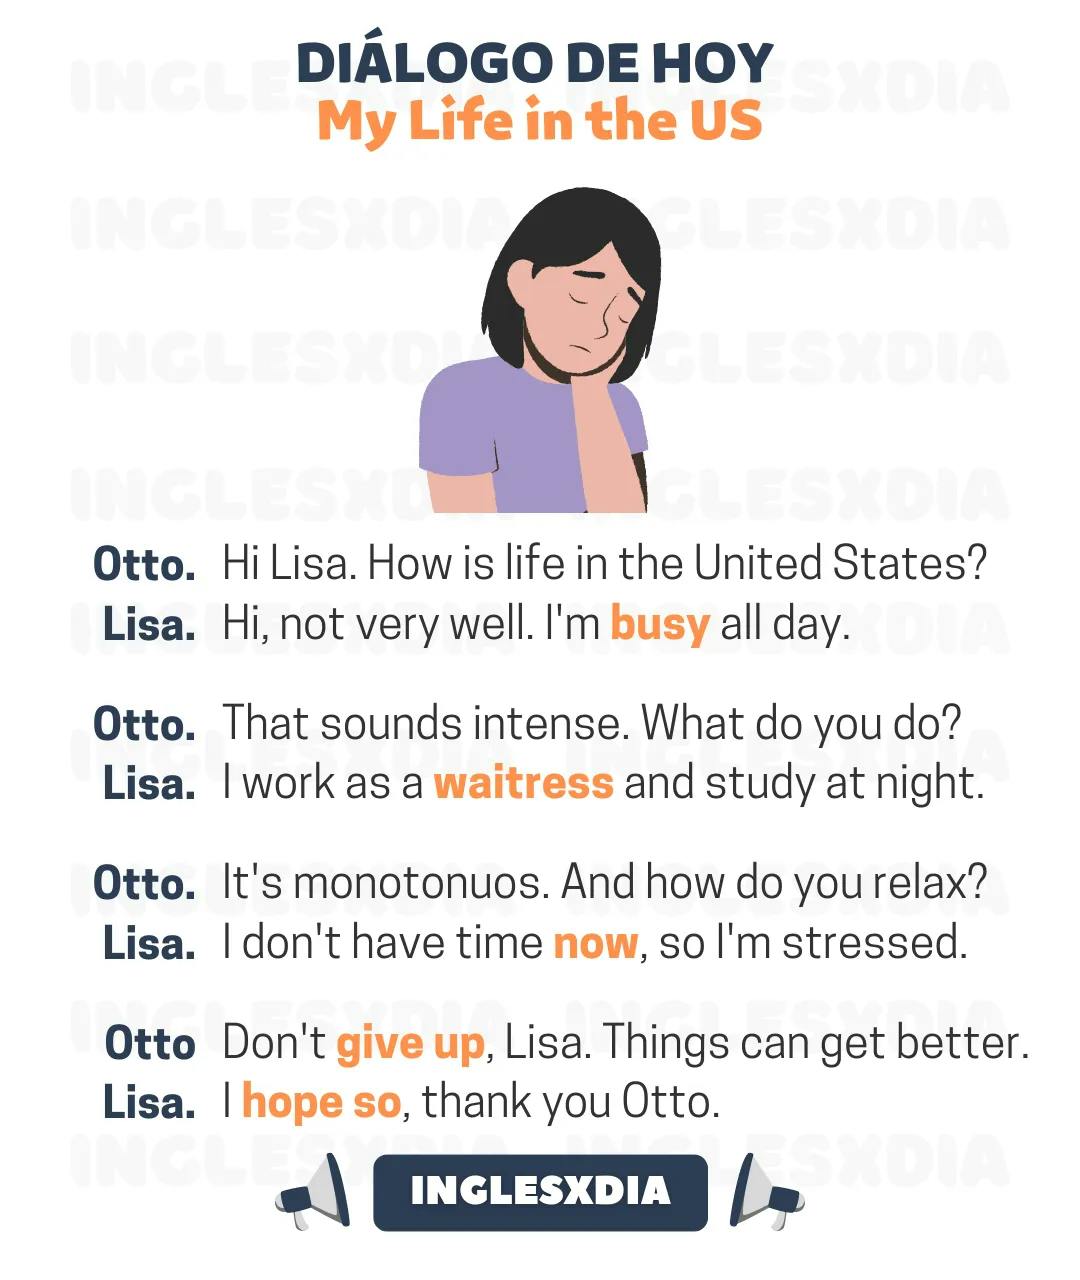 My Life in the US